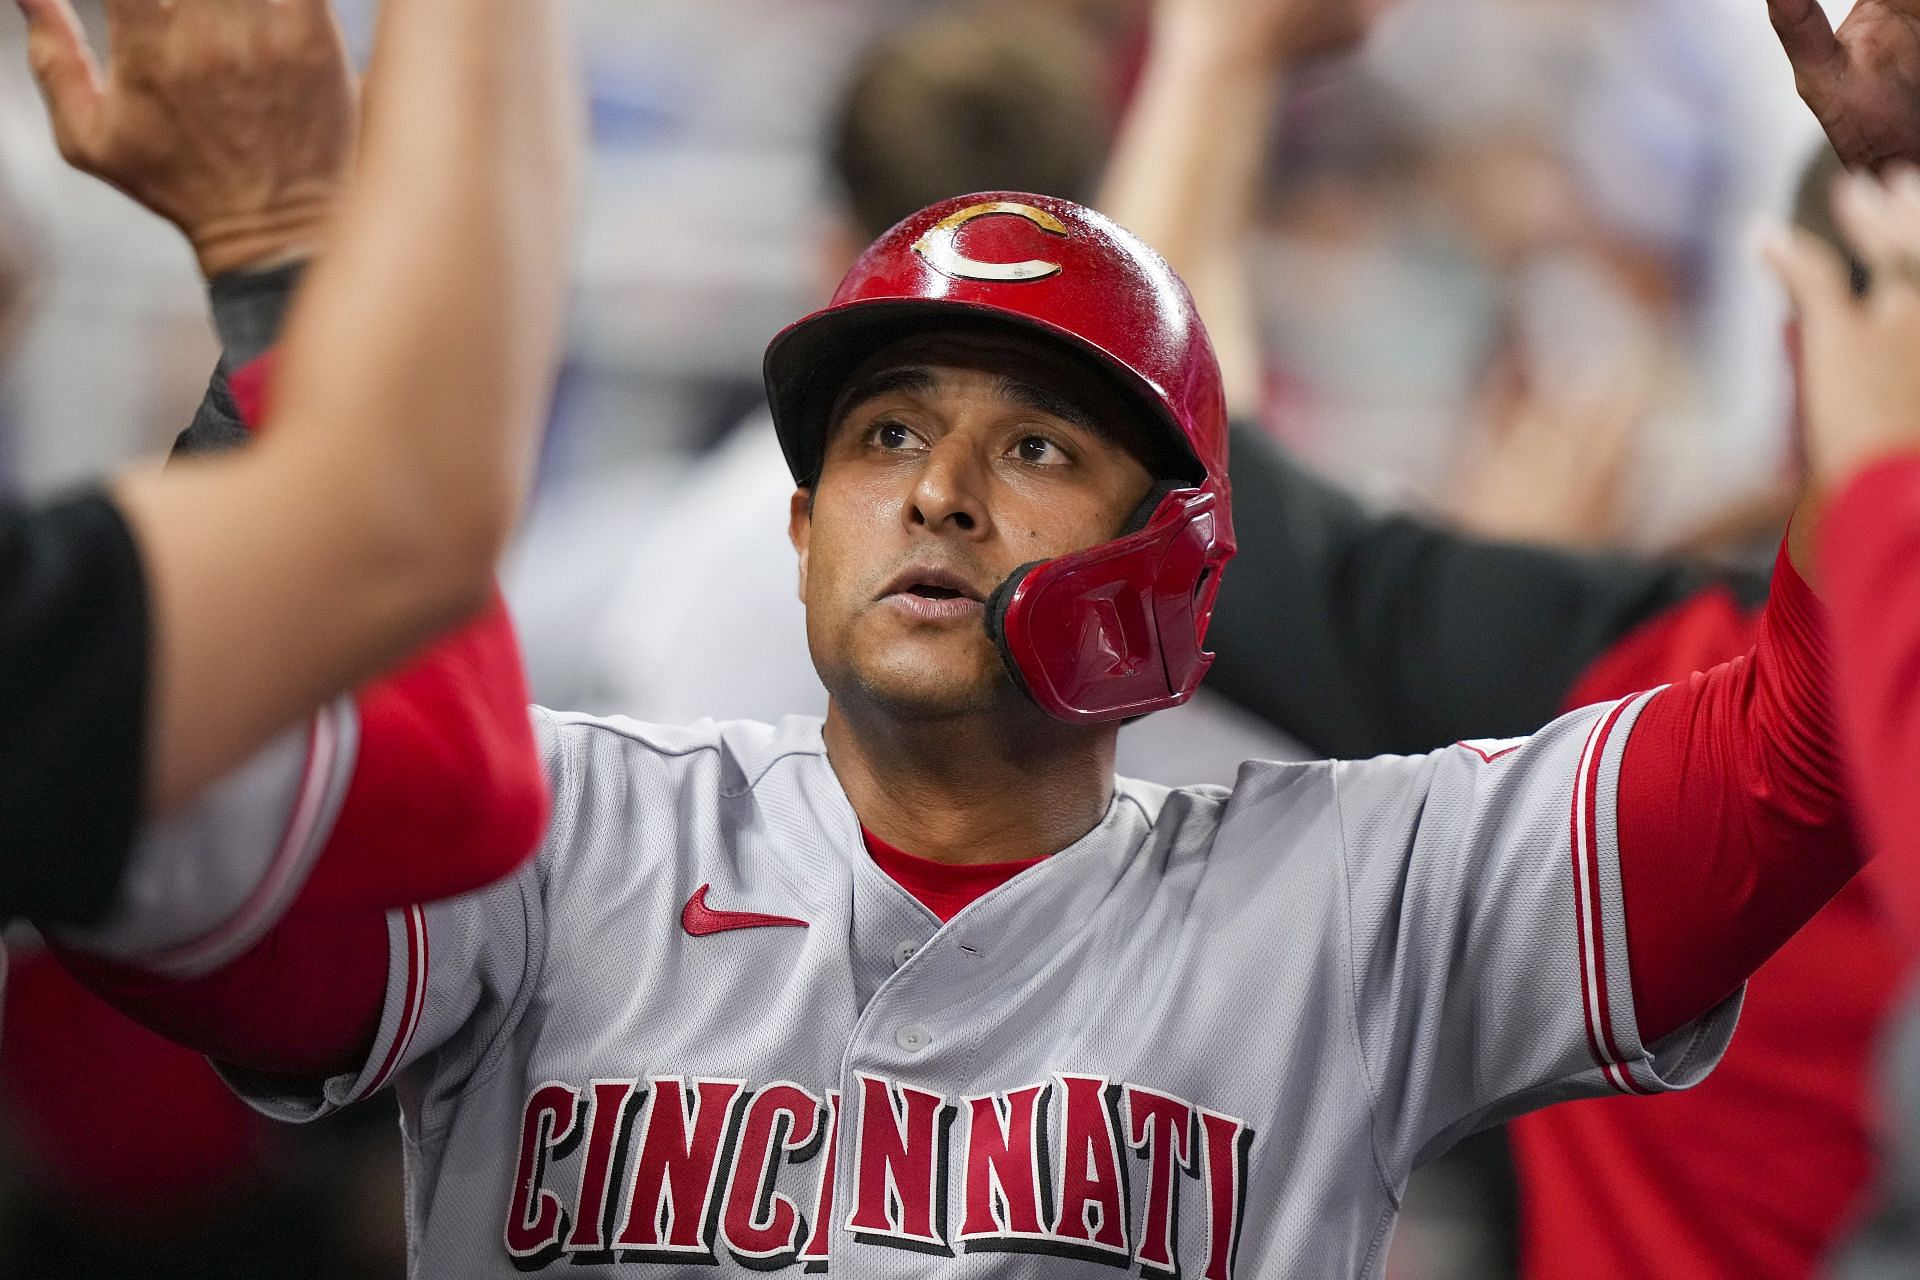 Donovan Solano, another Colombian in MLB who changes teams for